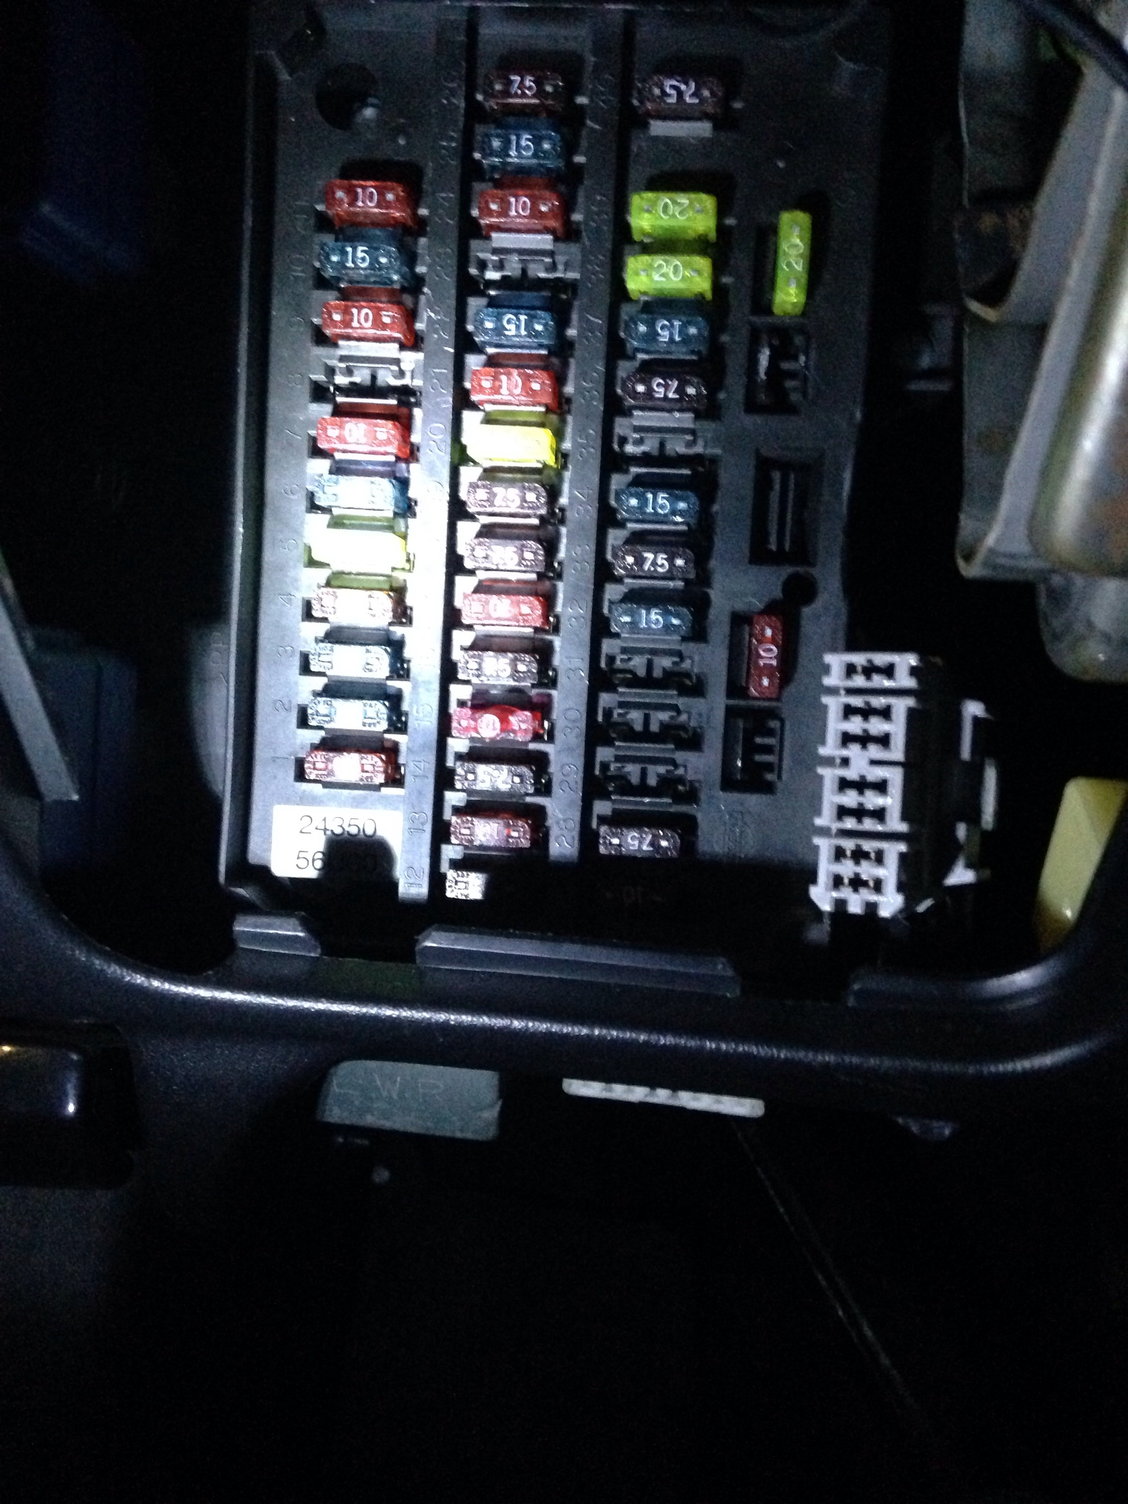 How to read fuse diagram? Getting frustrated now - Maxima ... 96 maxima fuse box 